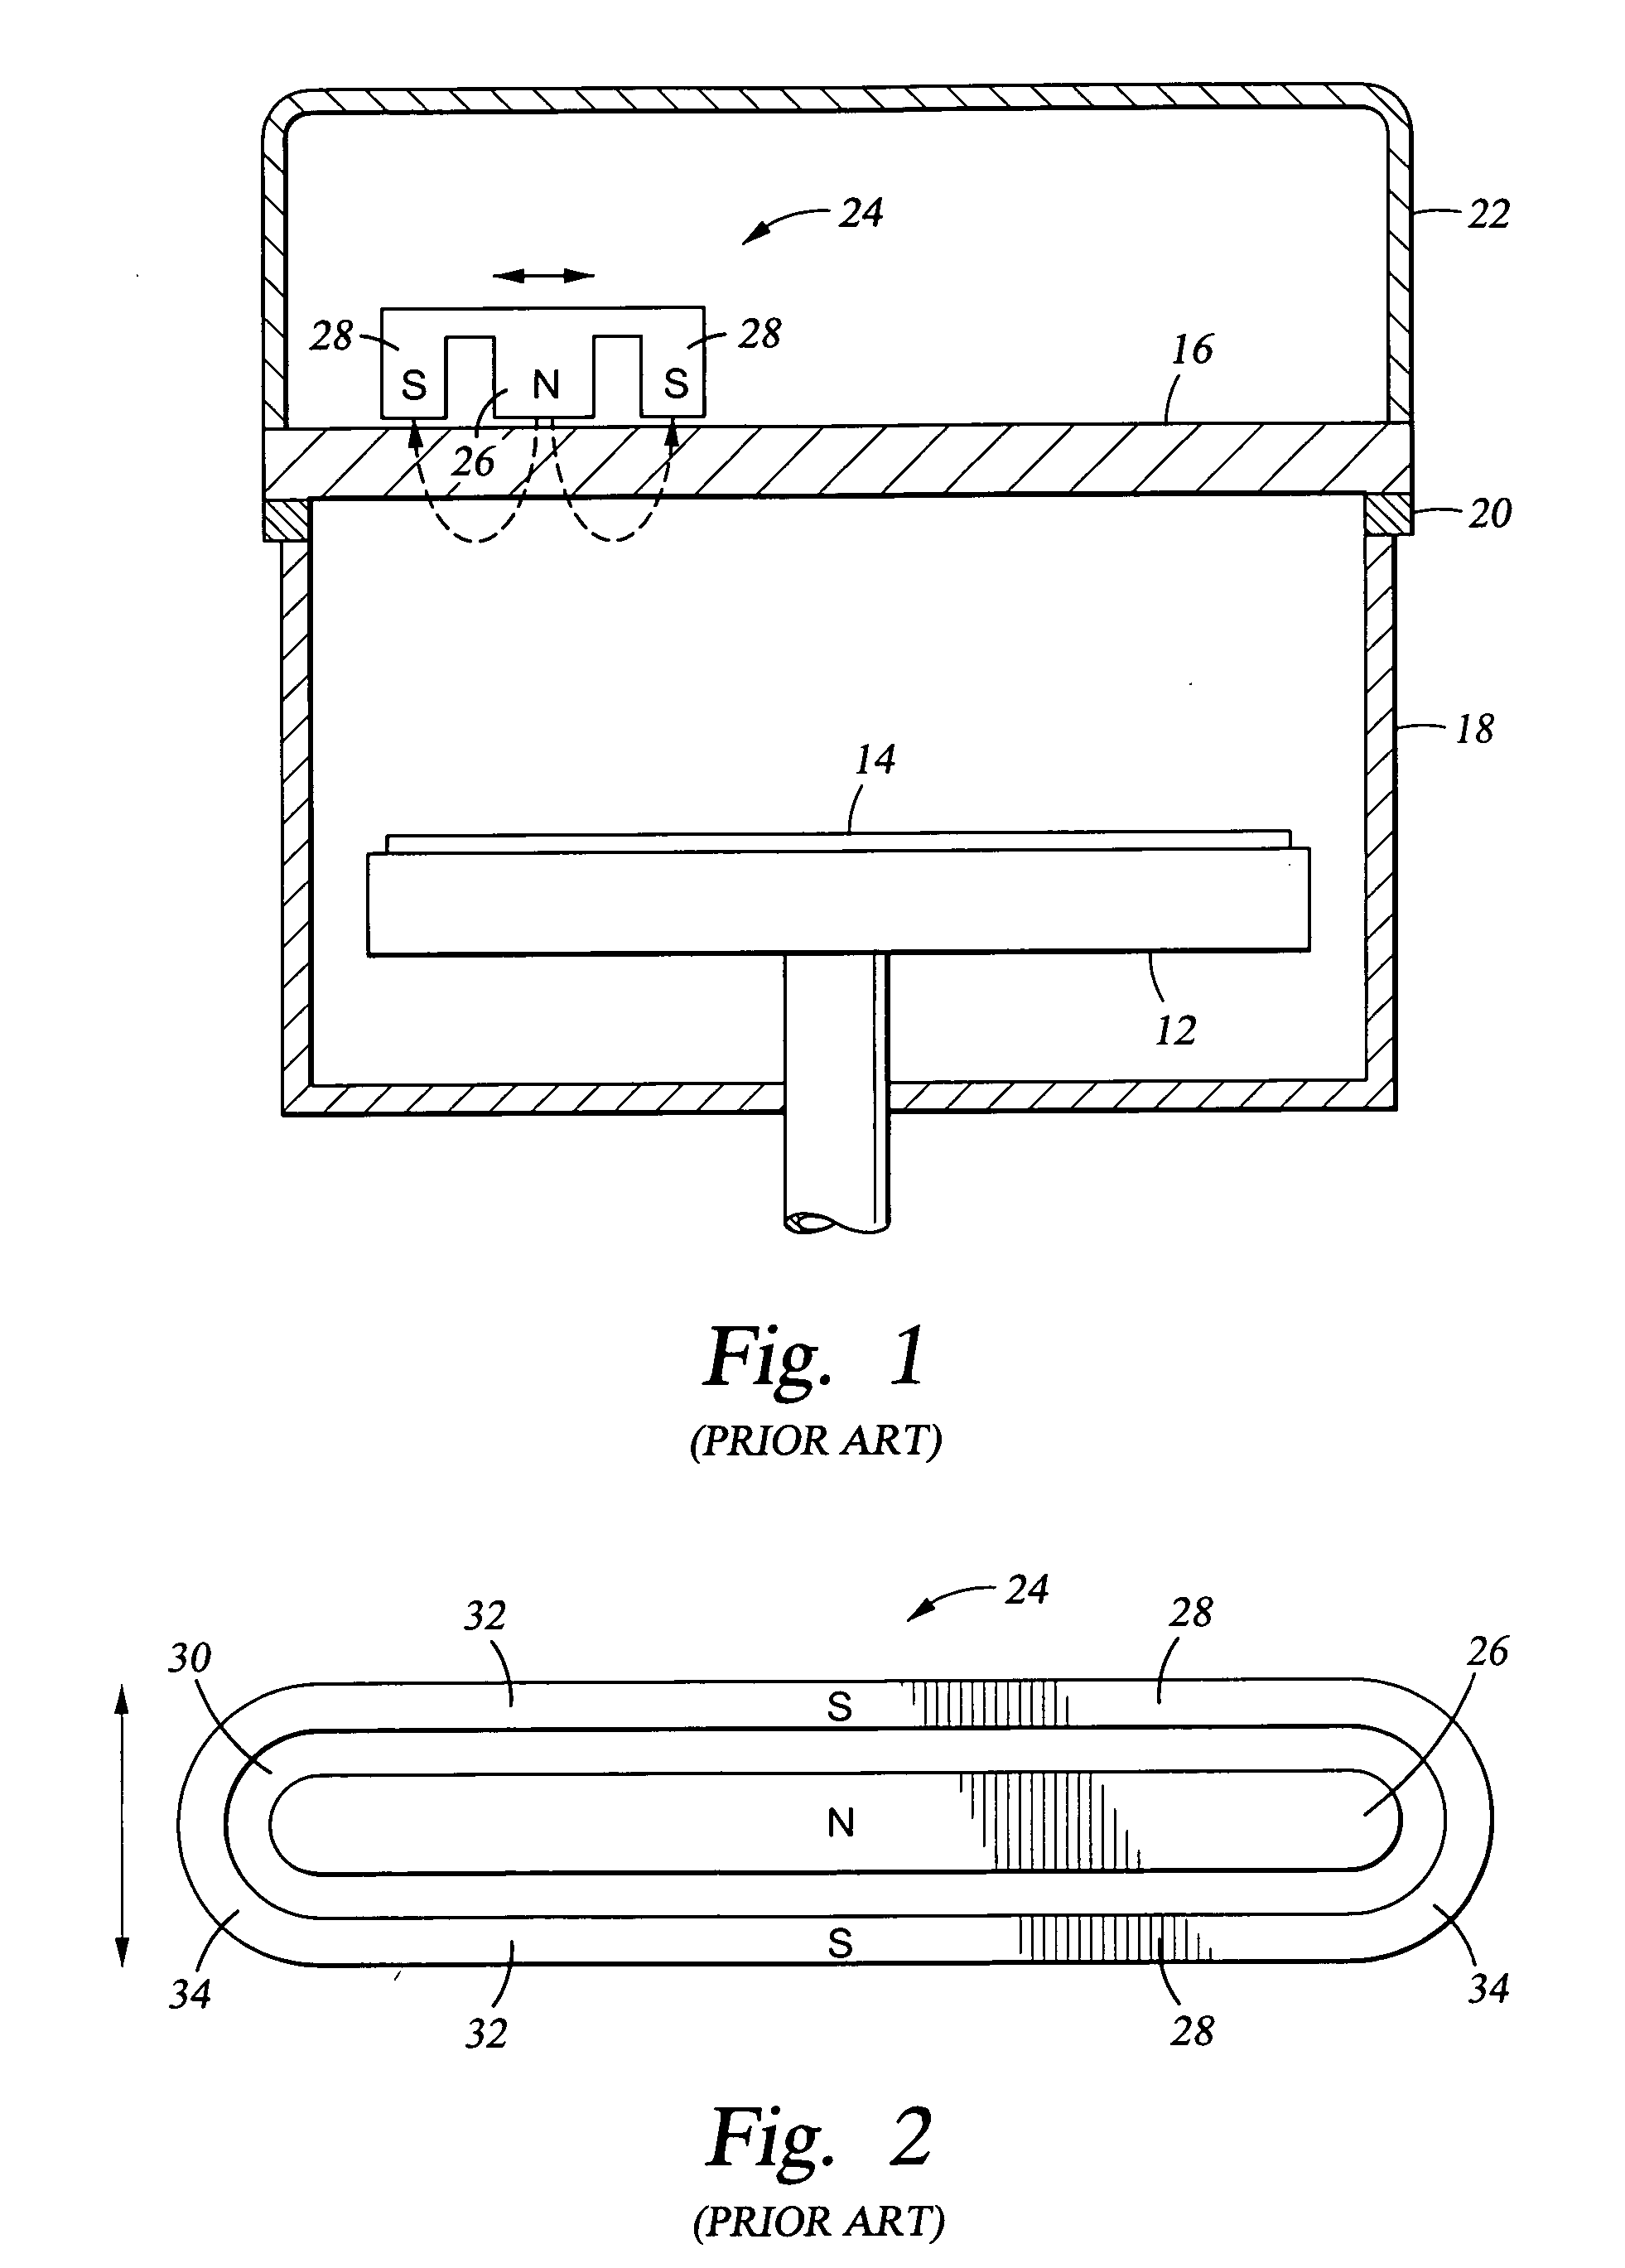 Apparatus and method for two dimensional magnetron scanning for sputtering onto flat panels